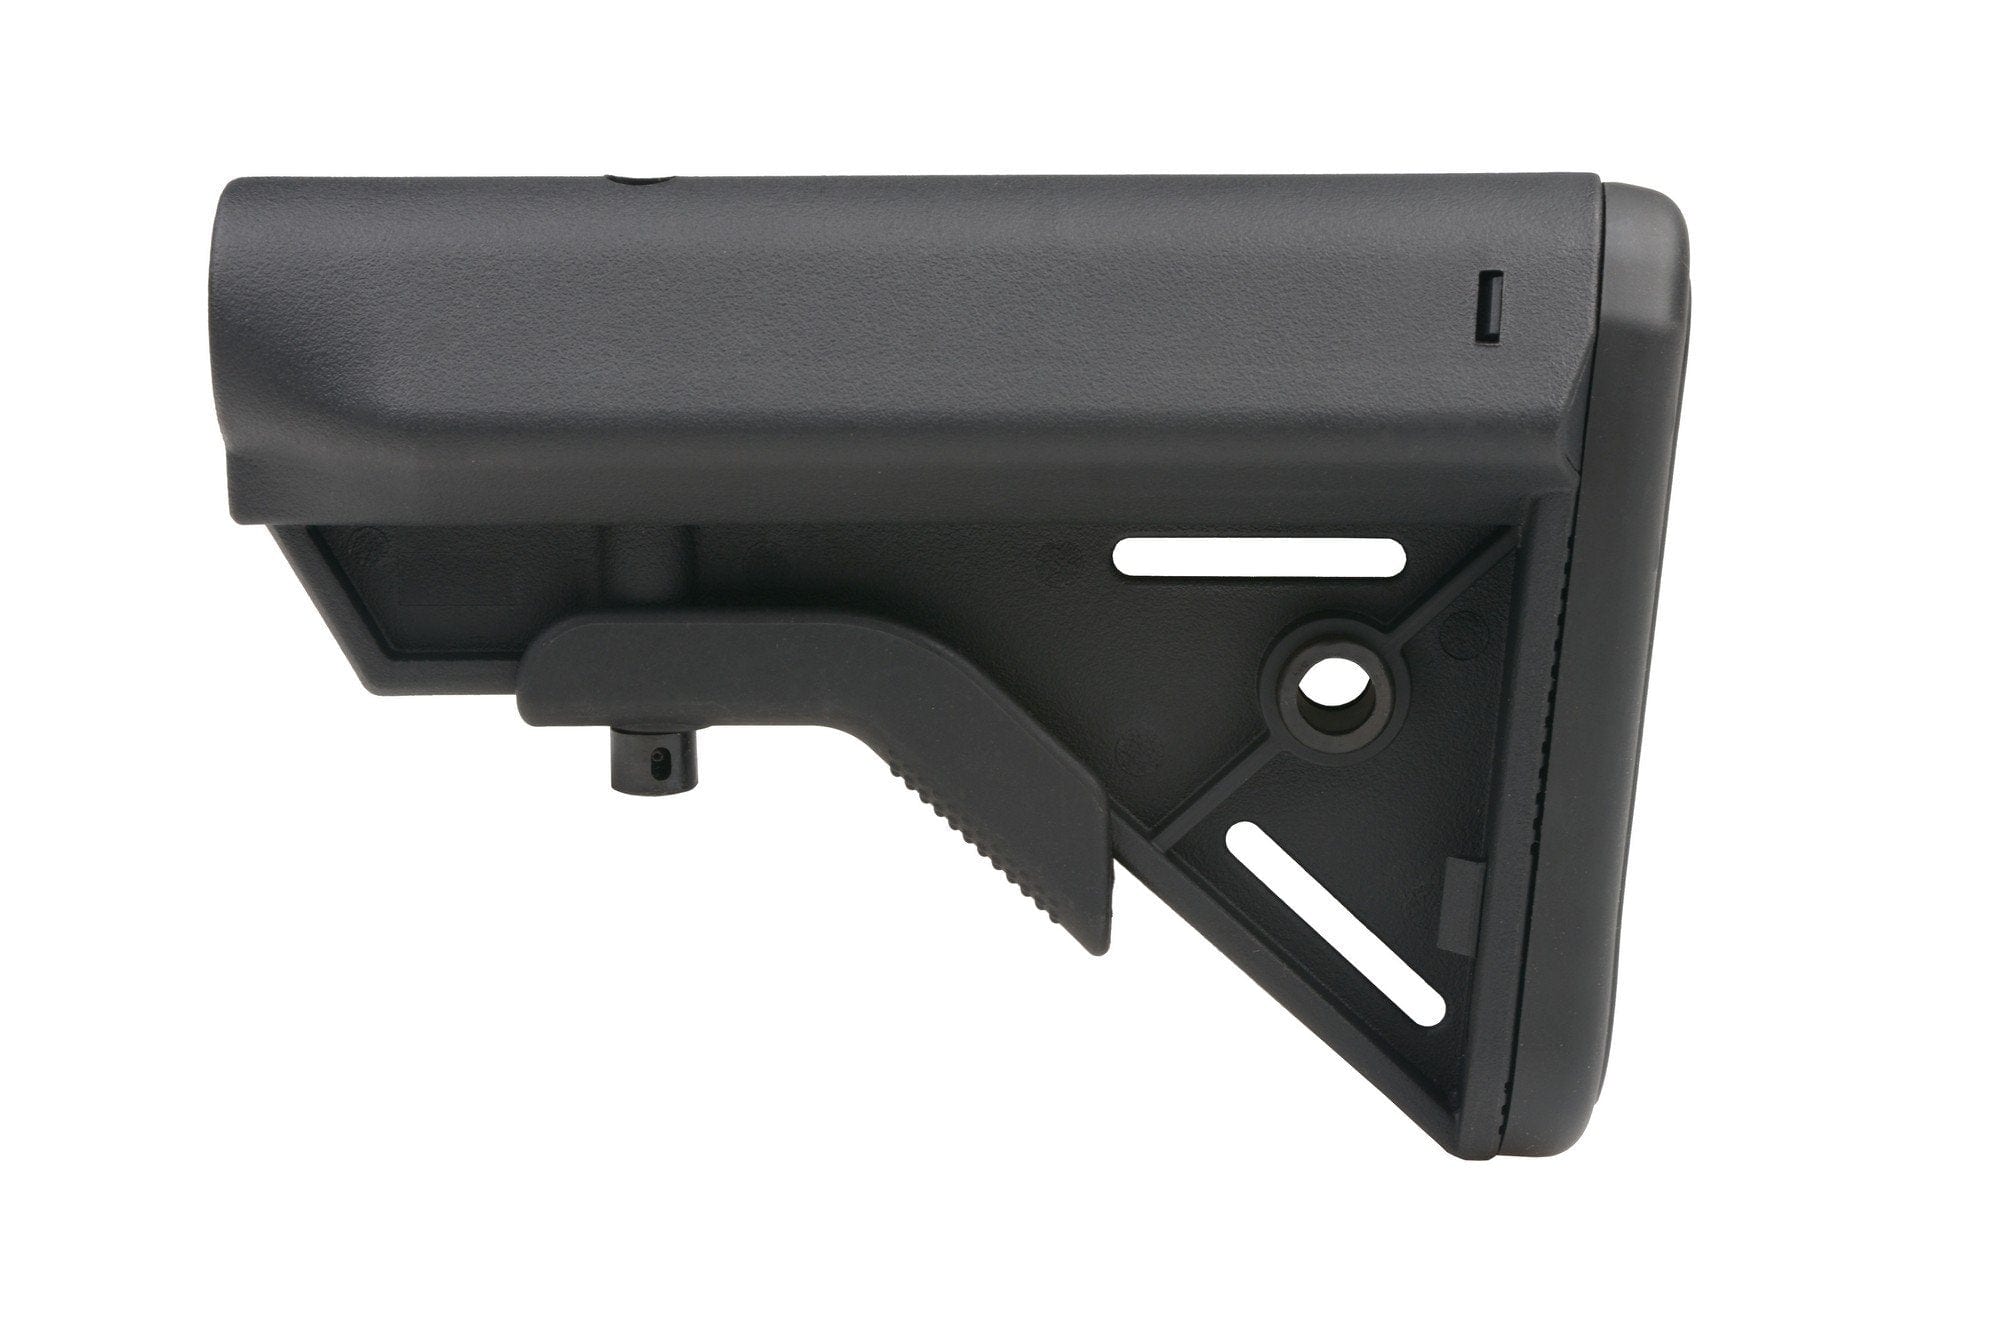 B5 Stock for M4/M16 - Black by E&L Airsoft on Airsoft Mania Europe